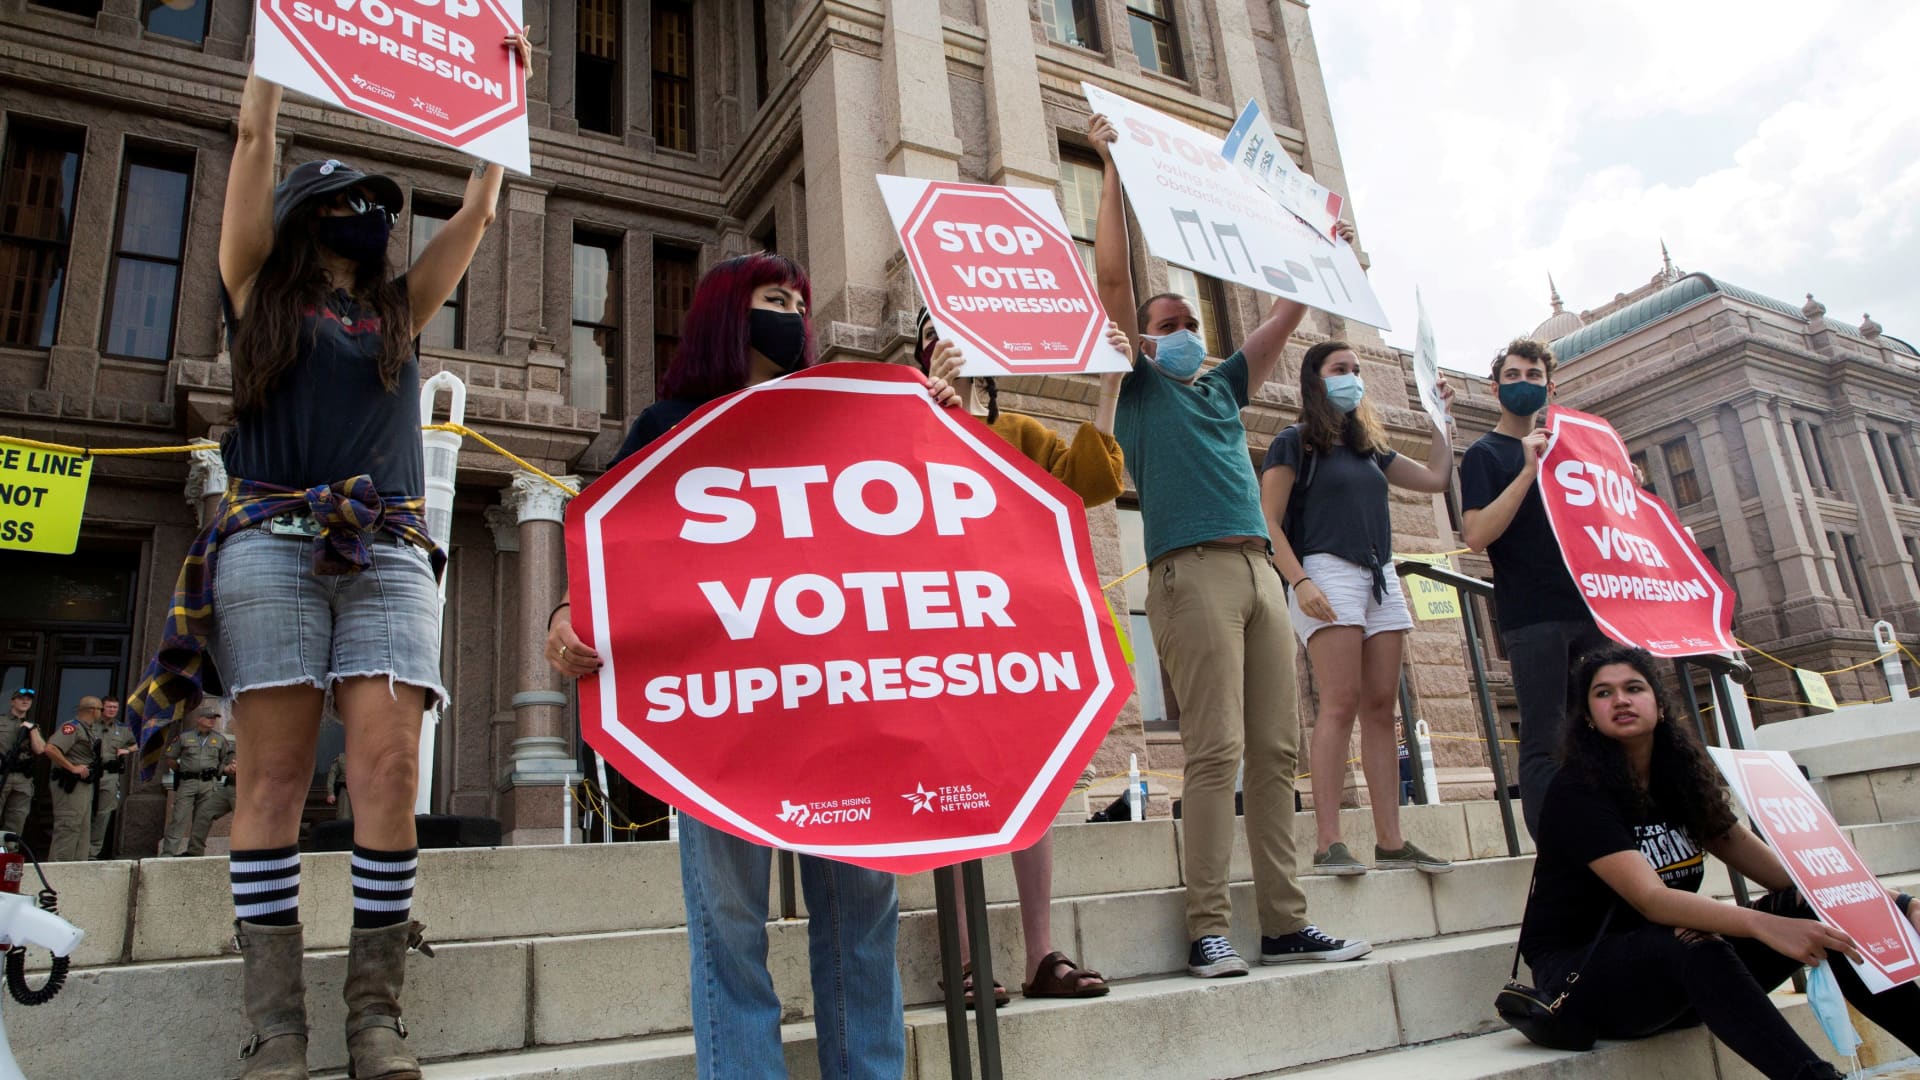 Voting rights activists gather during a protest against Texas legislators who are advancing new voting restrictions in Austin, Texas, U.S., May 8, 2021.